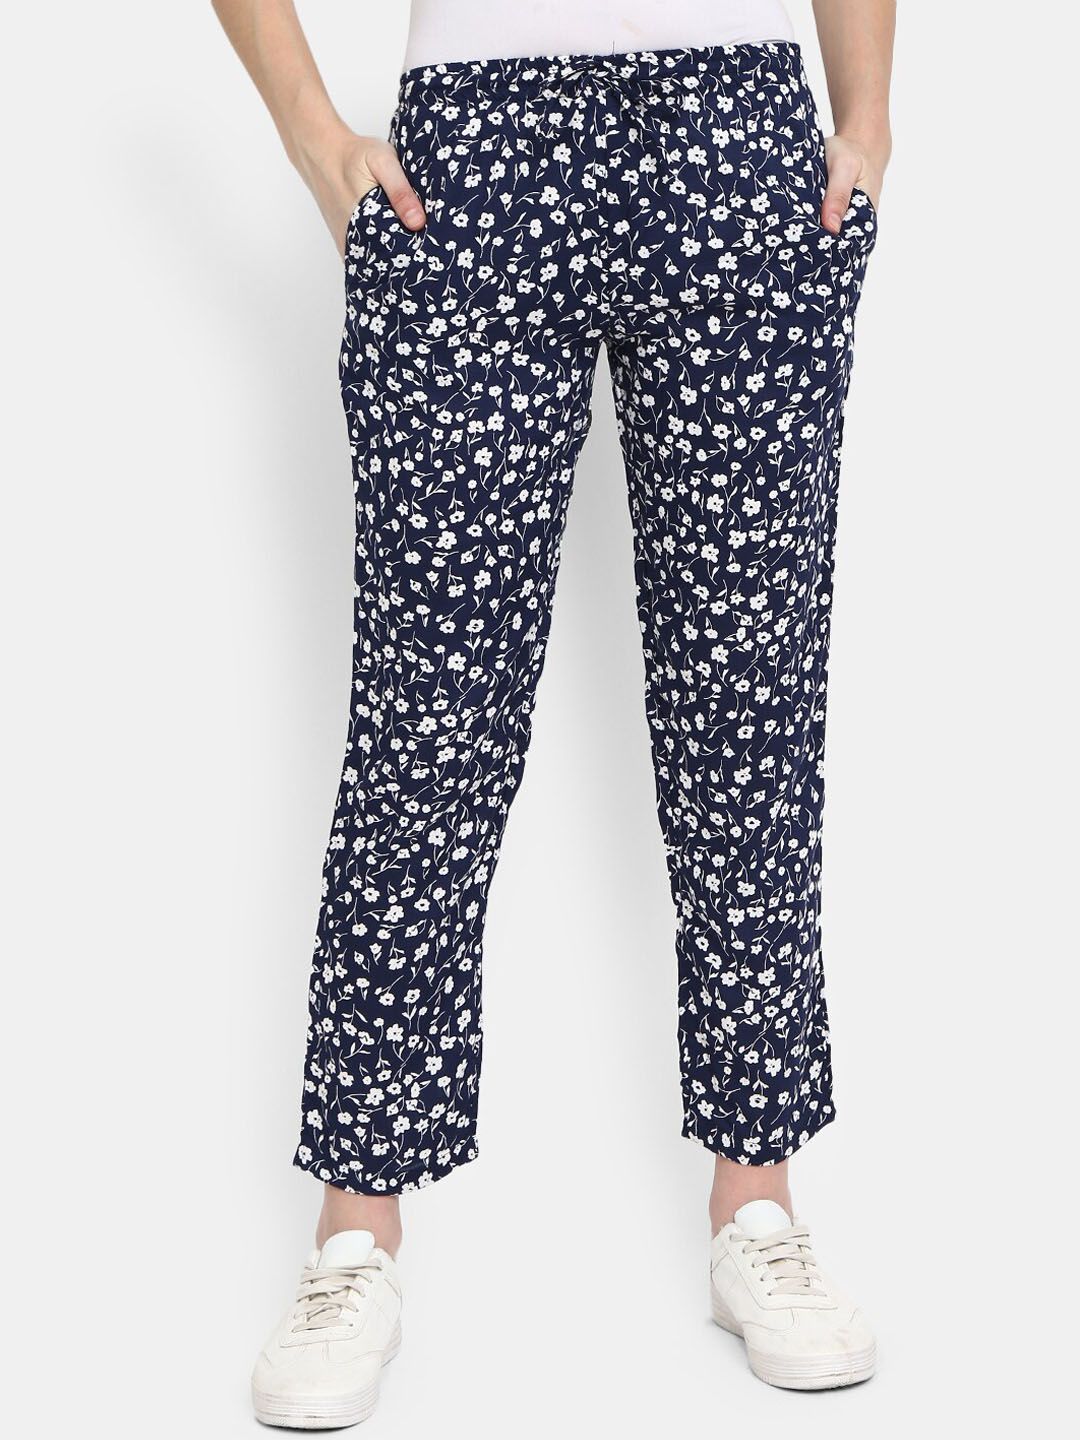 V-Mart Blue Floral Printed Lounge Pants Price in India